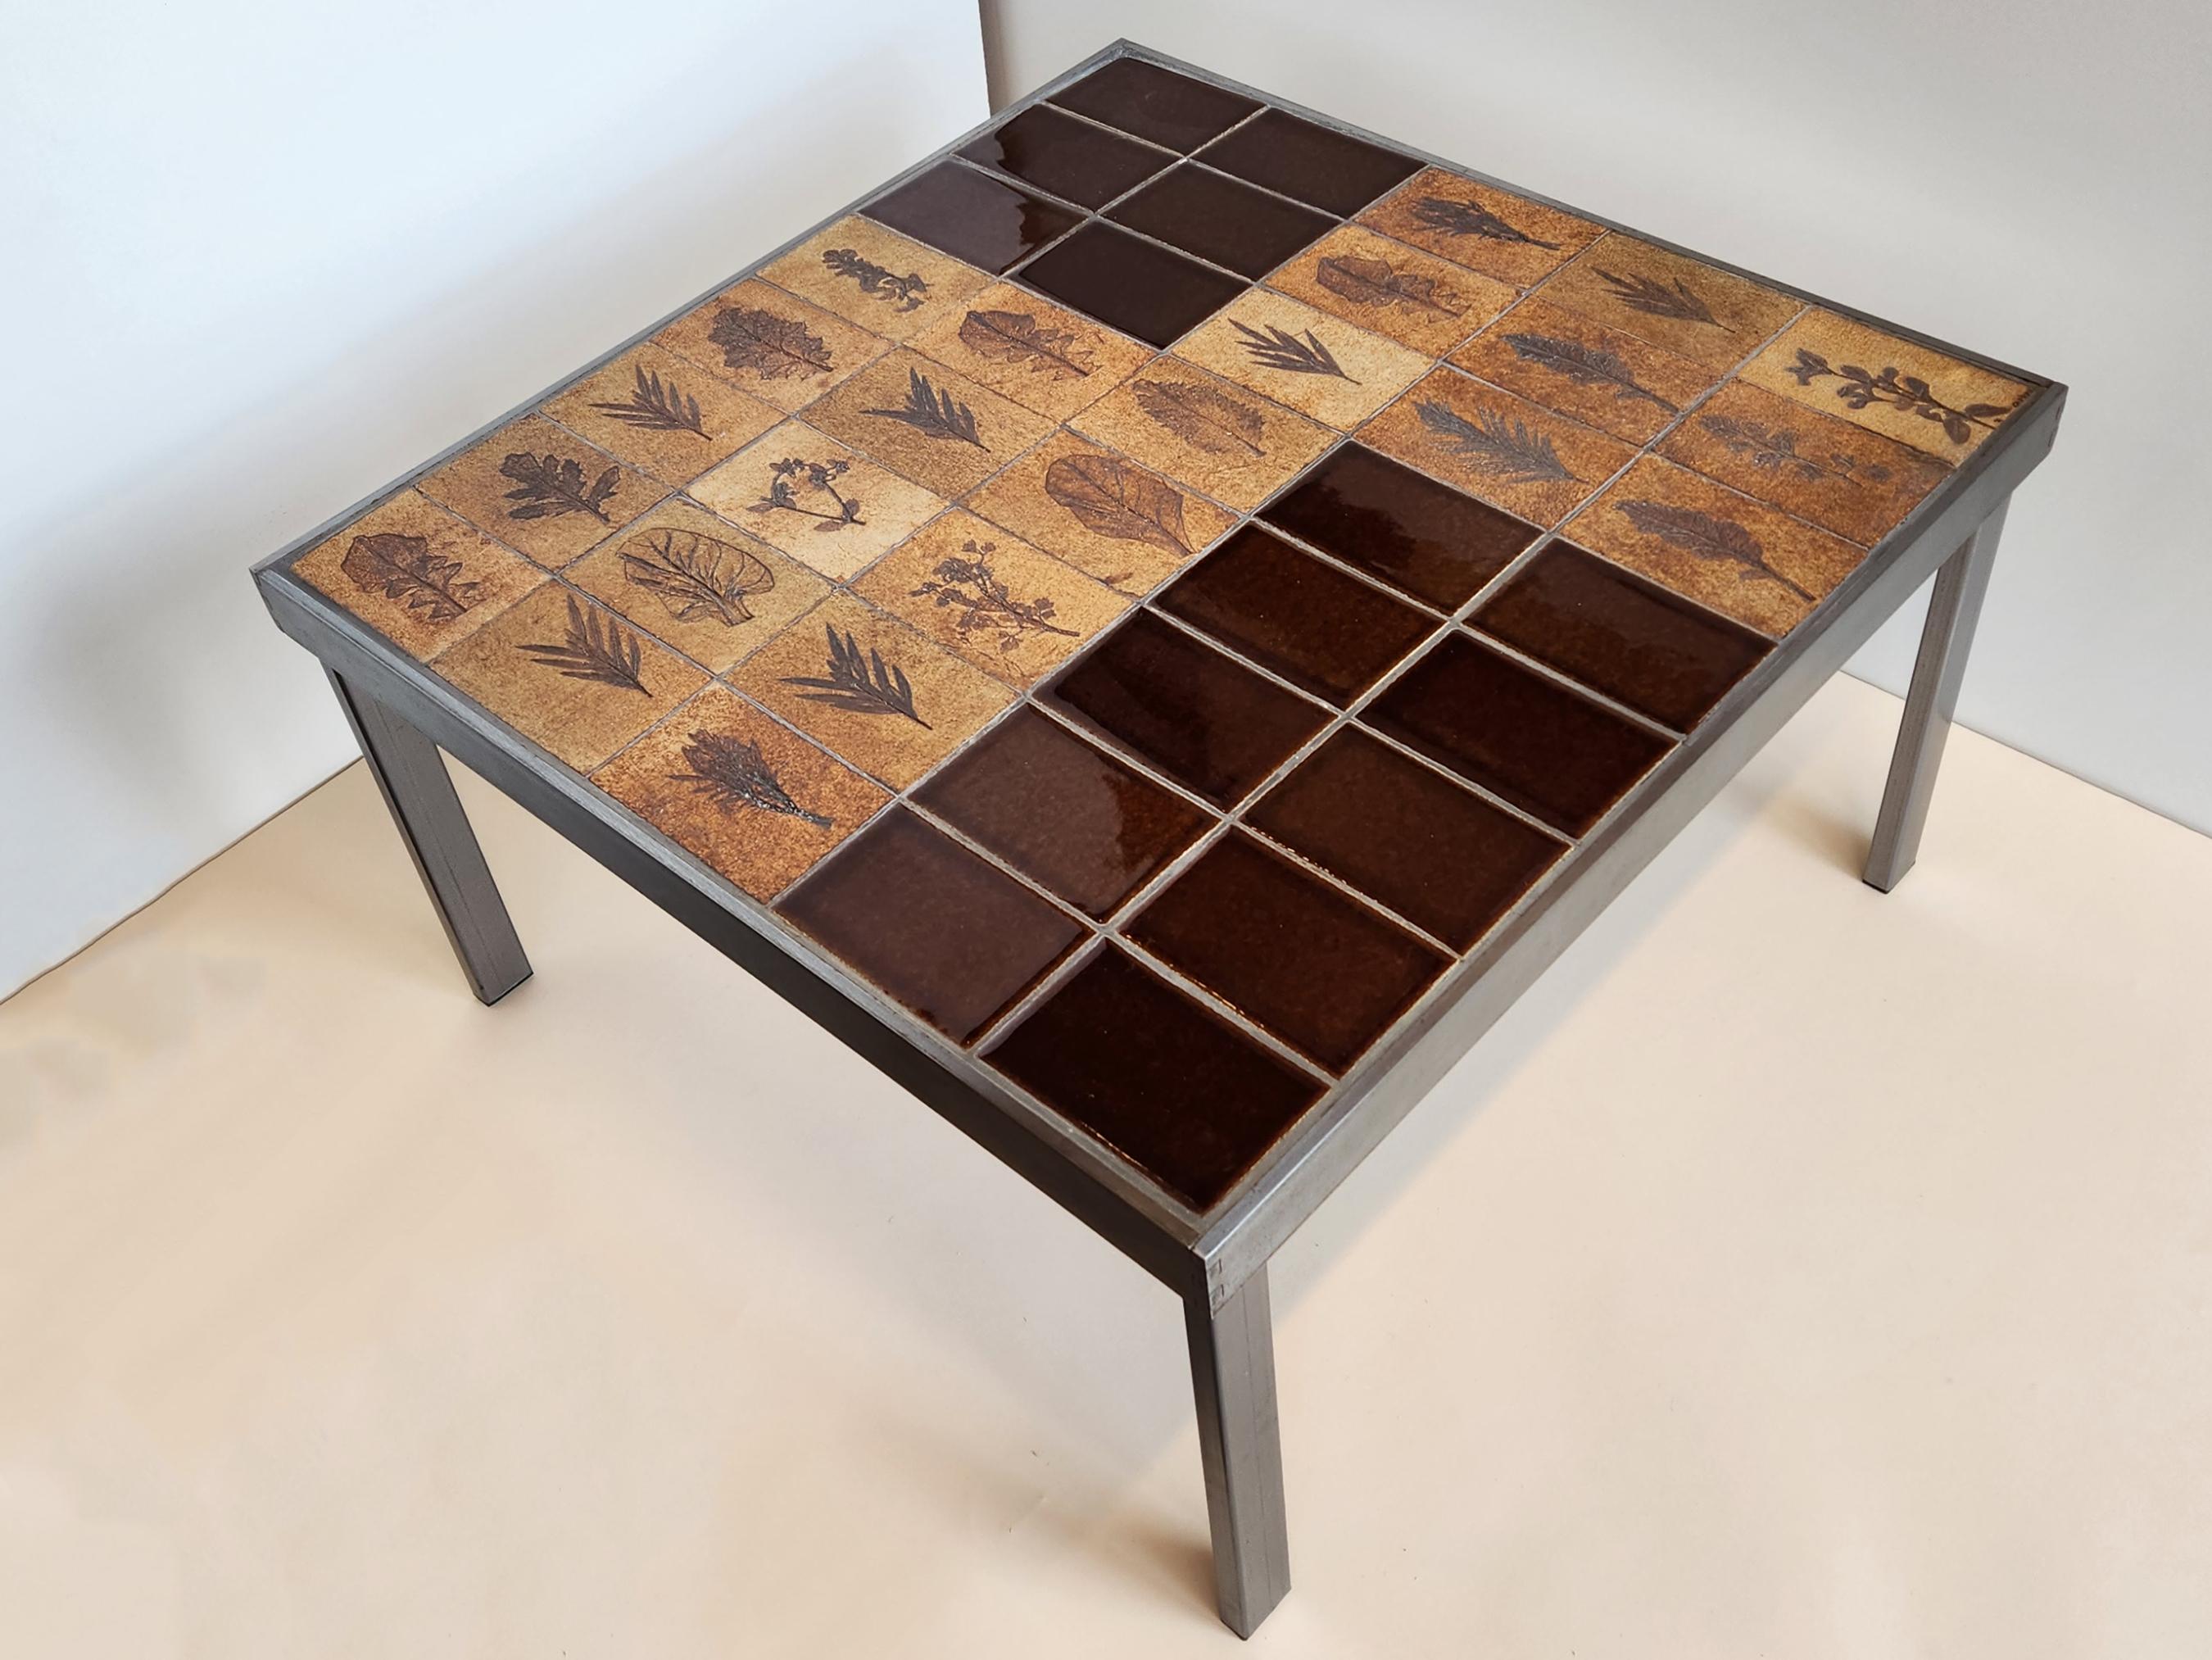 *** Important detail: custom height available (1)***

Square end table with the famous Roger Capron Garrigue tiles, designed from 1968 to 1982. Mr. Capron was often balancing his designs by incorporating either brown or white enameled terra cotta